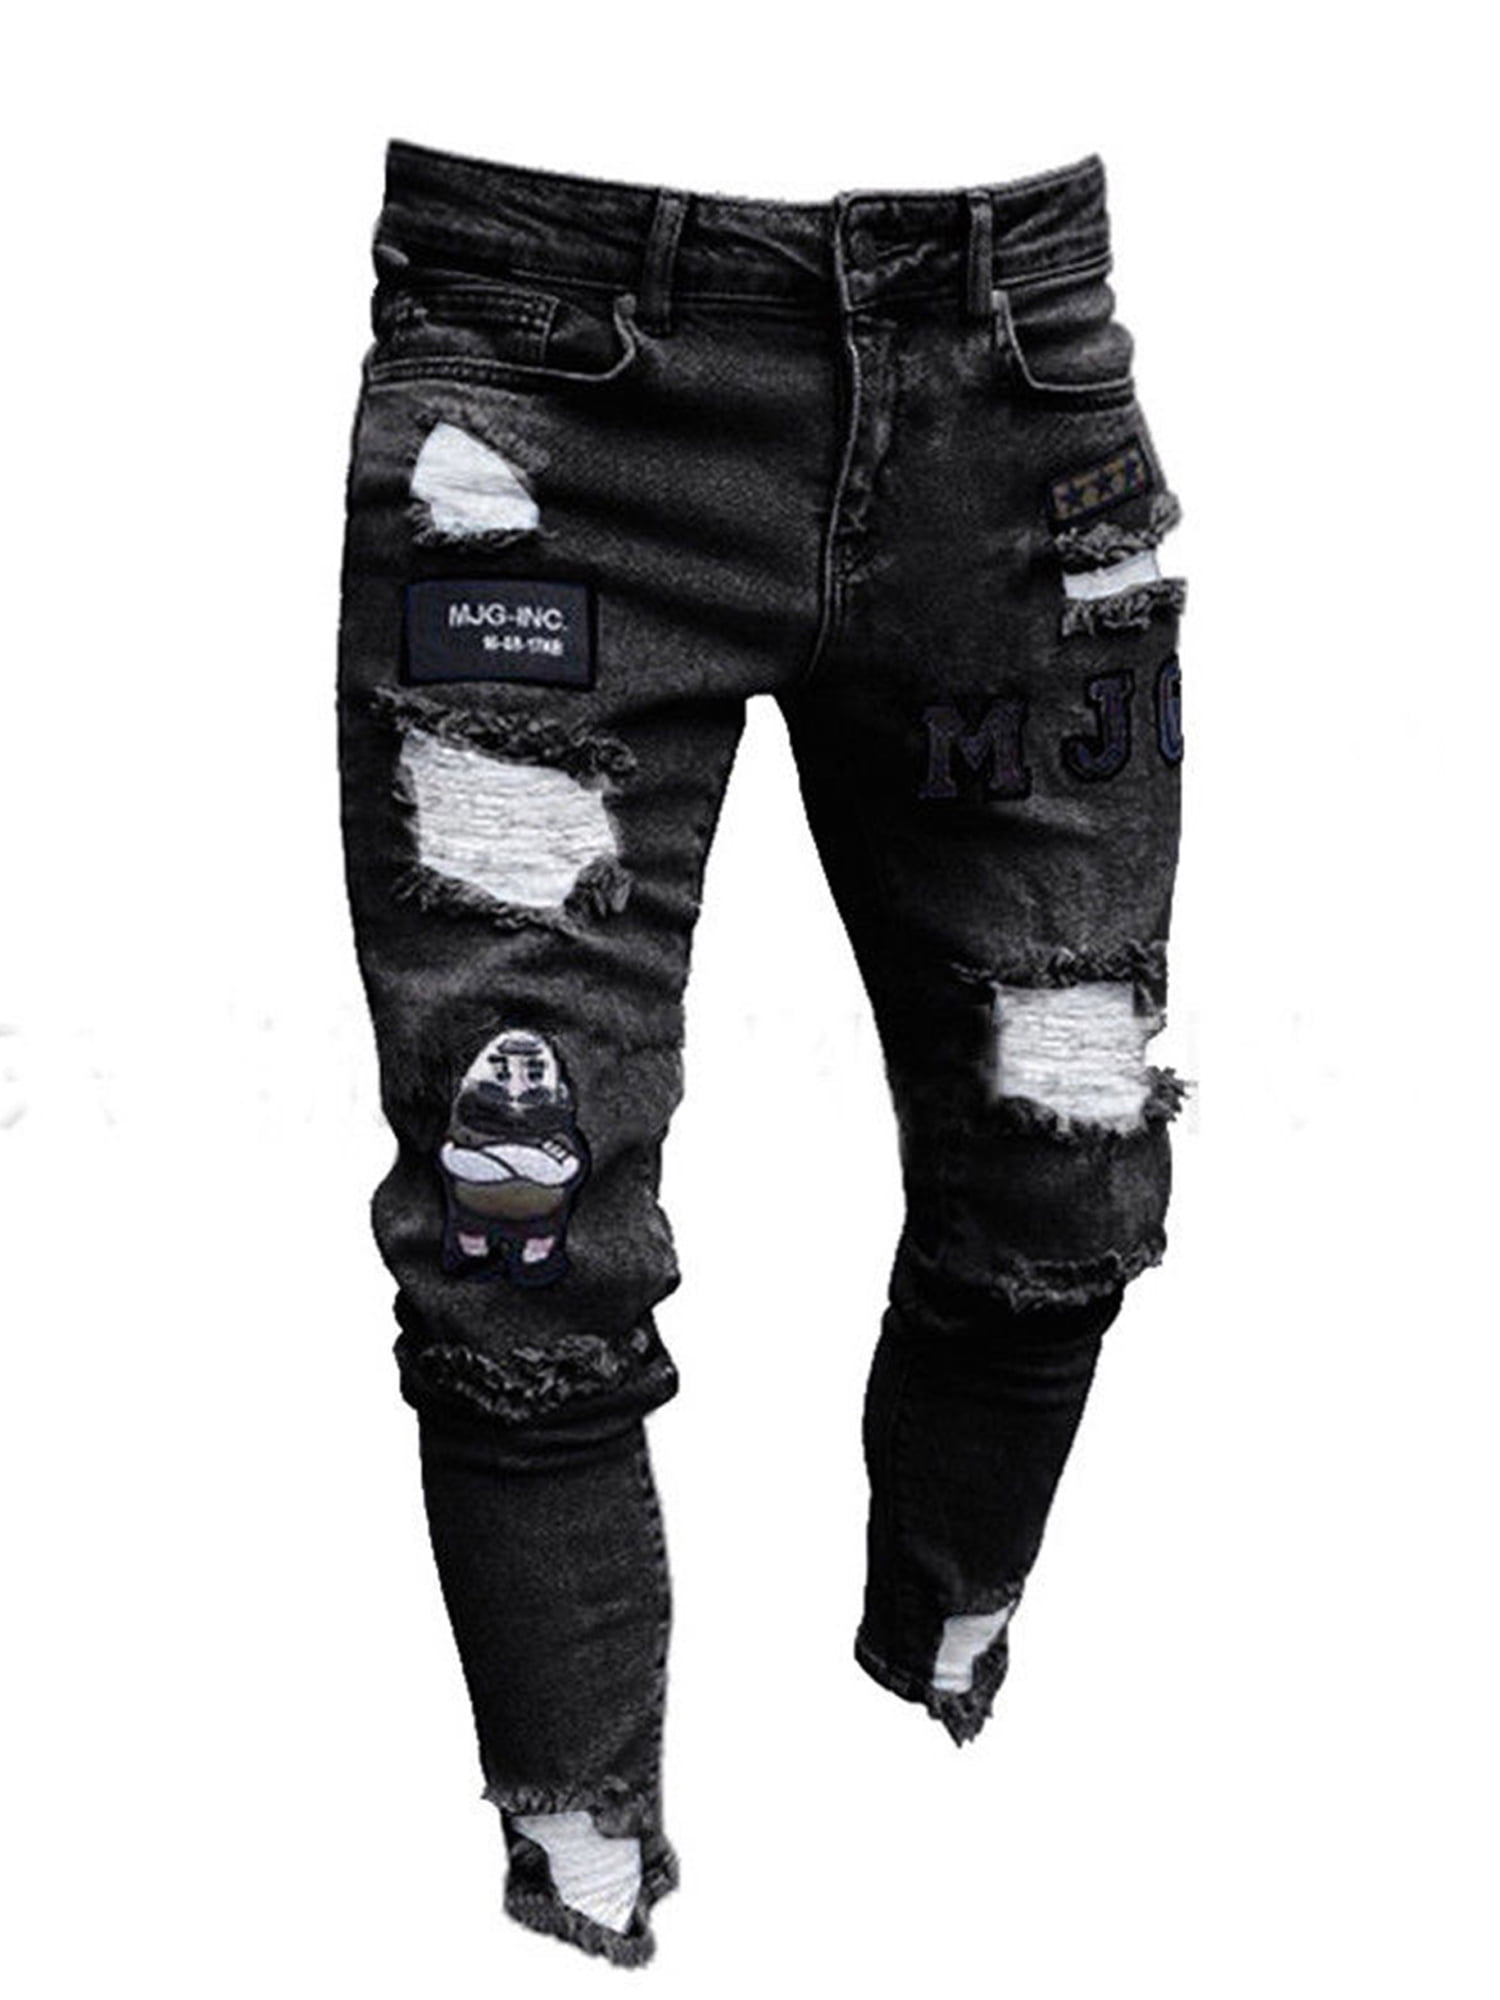 Sunisery Men Stretchy Ripped Skinny Biker Hip Hop Jeans Destroyed Taped ...